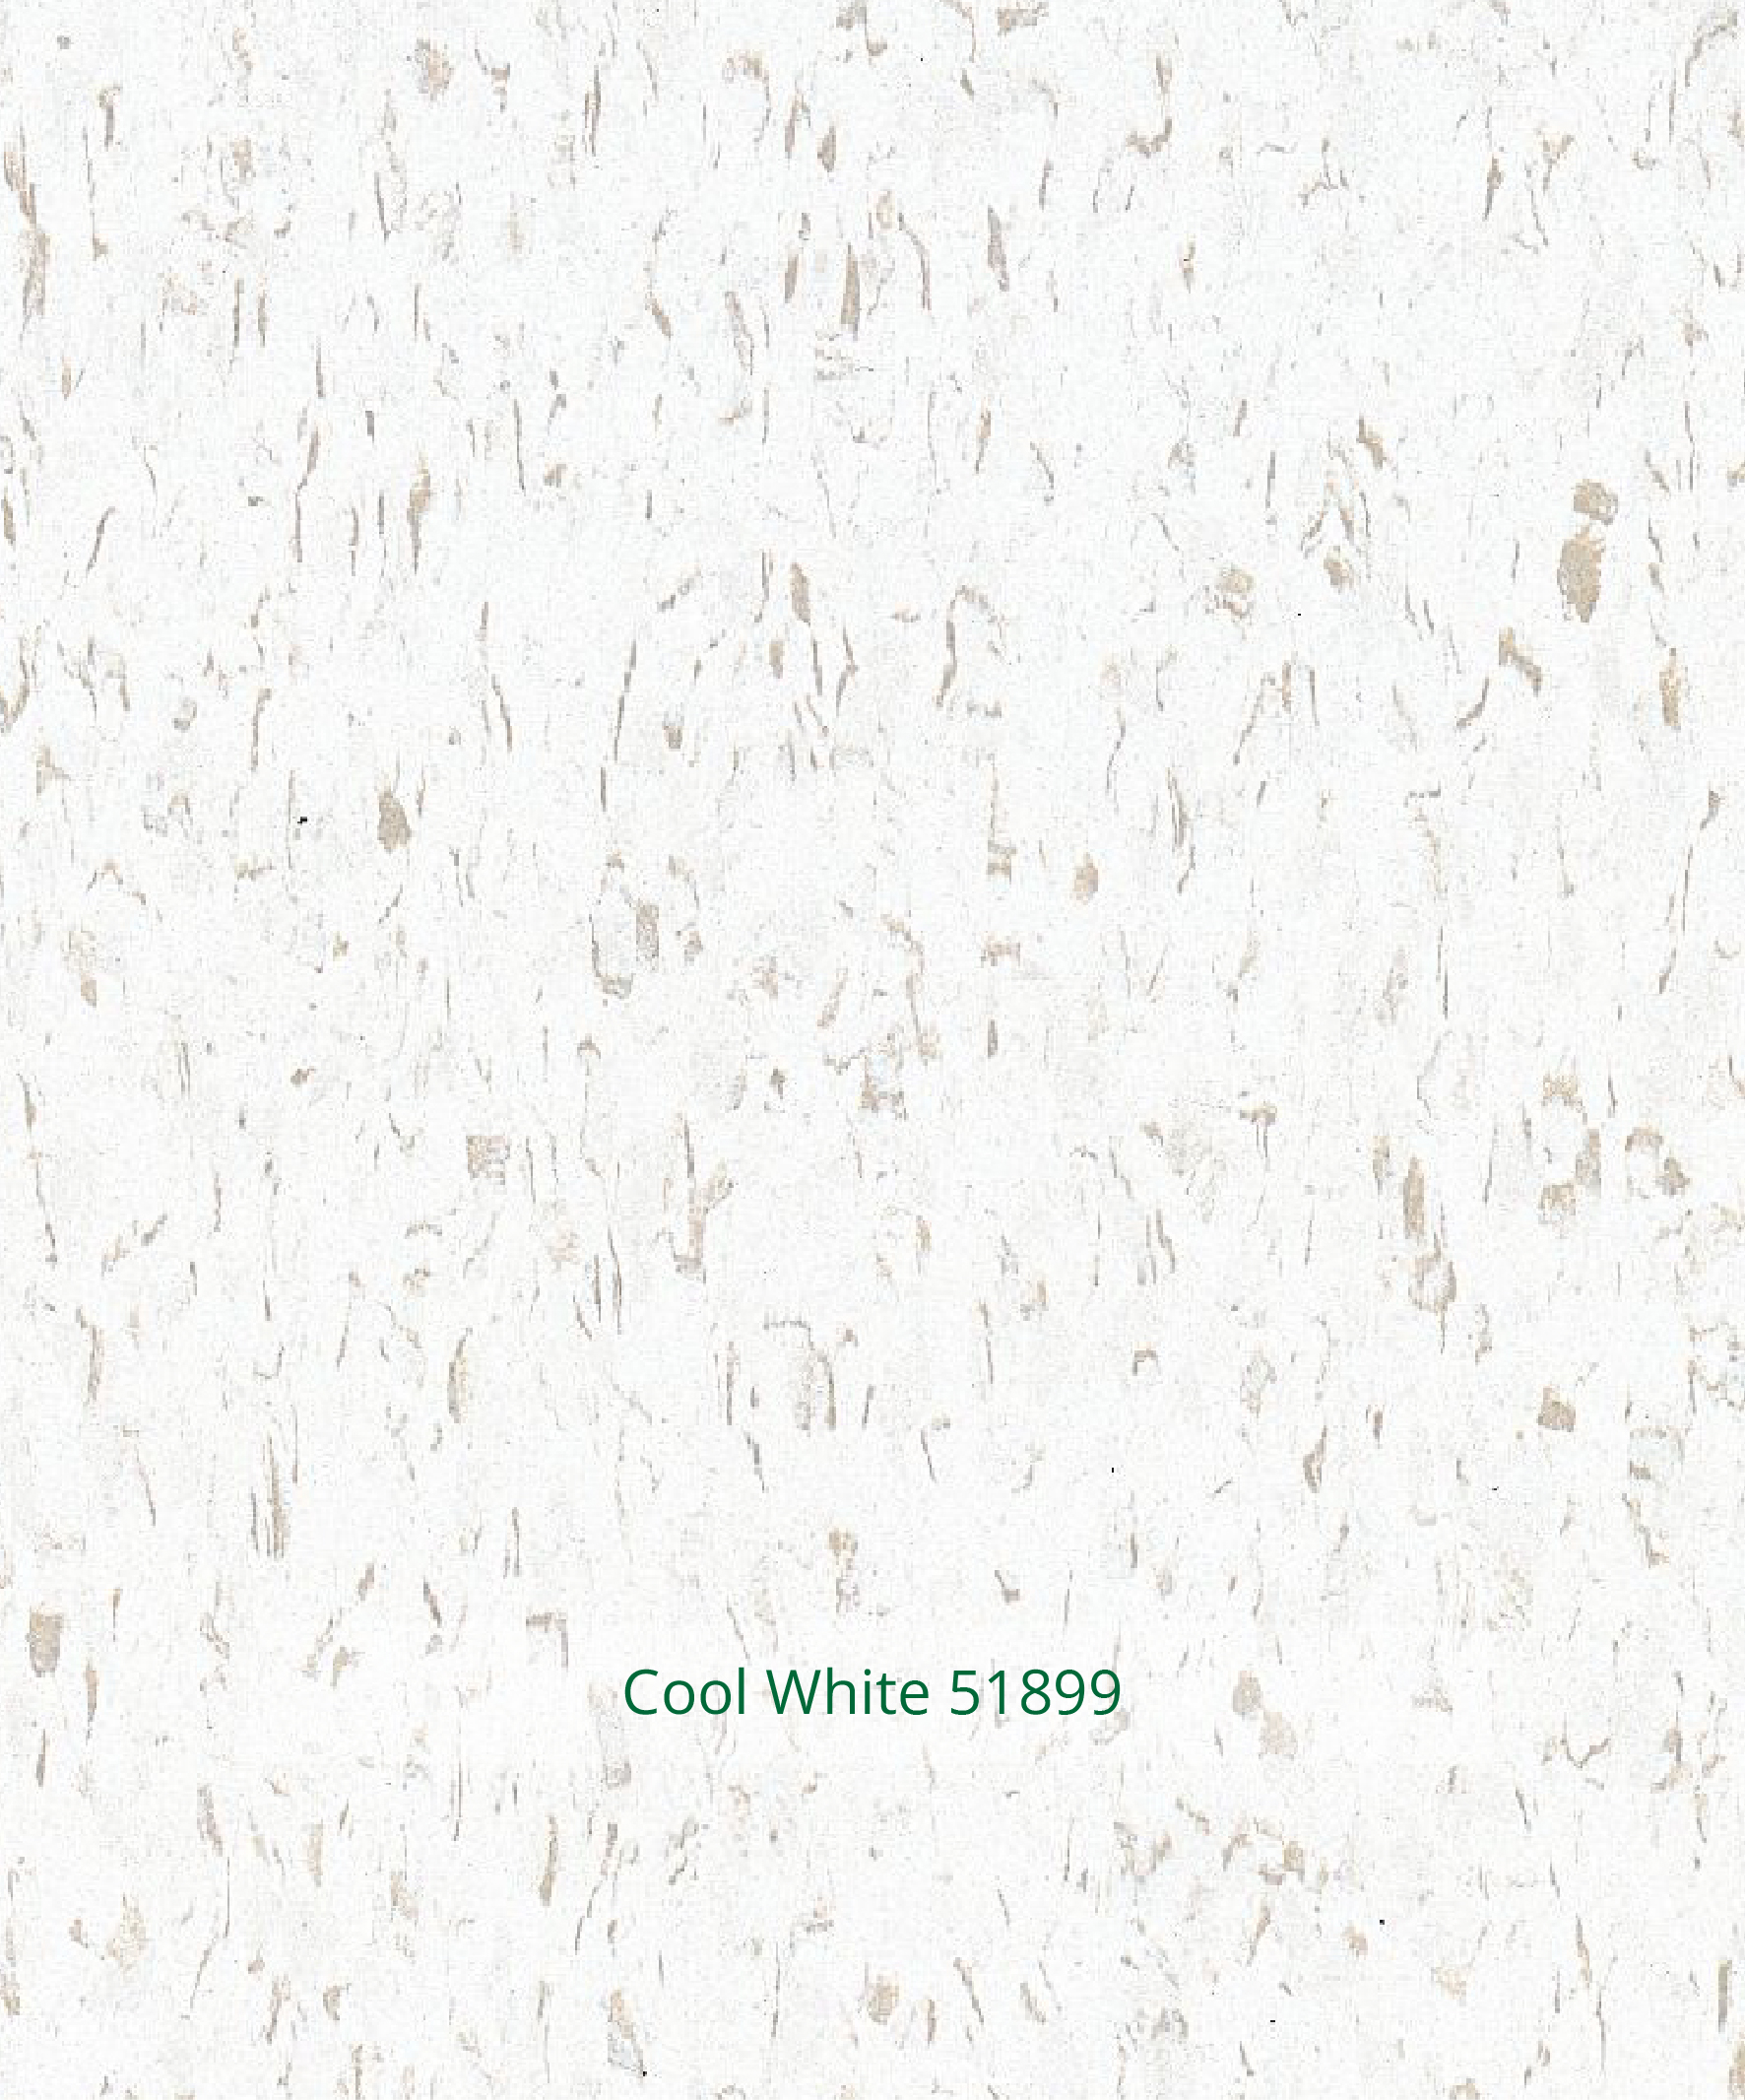 Standard EXCELON Imperial Series Cool White 51899a